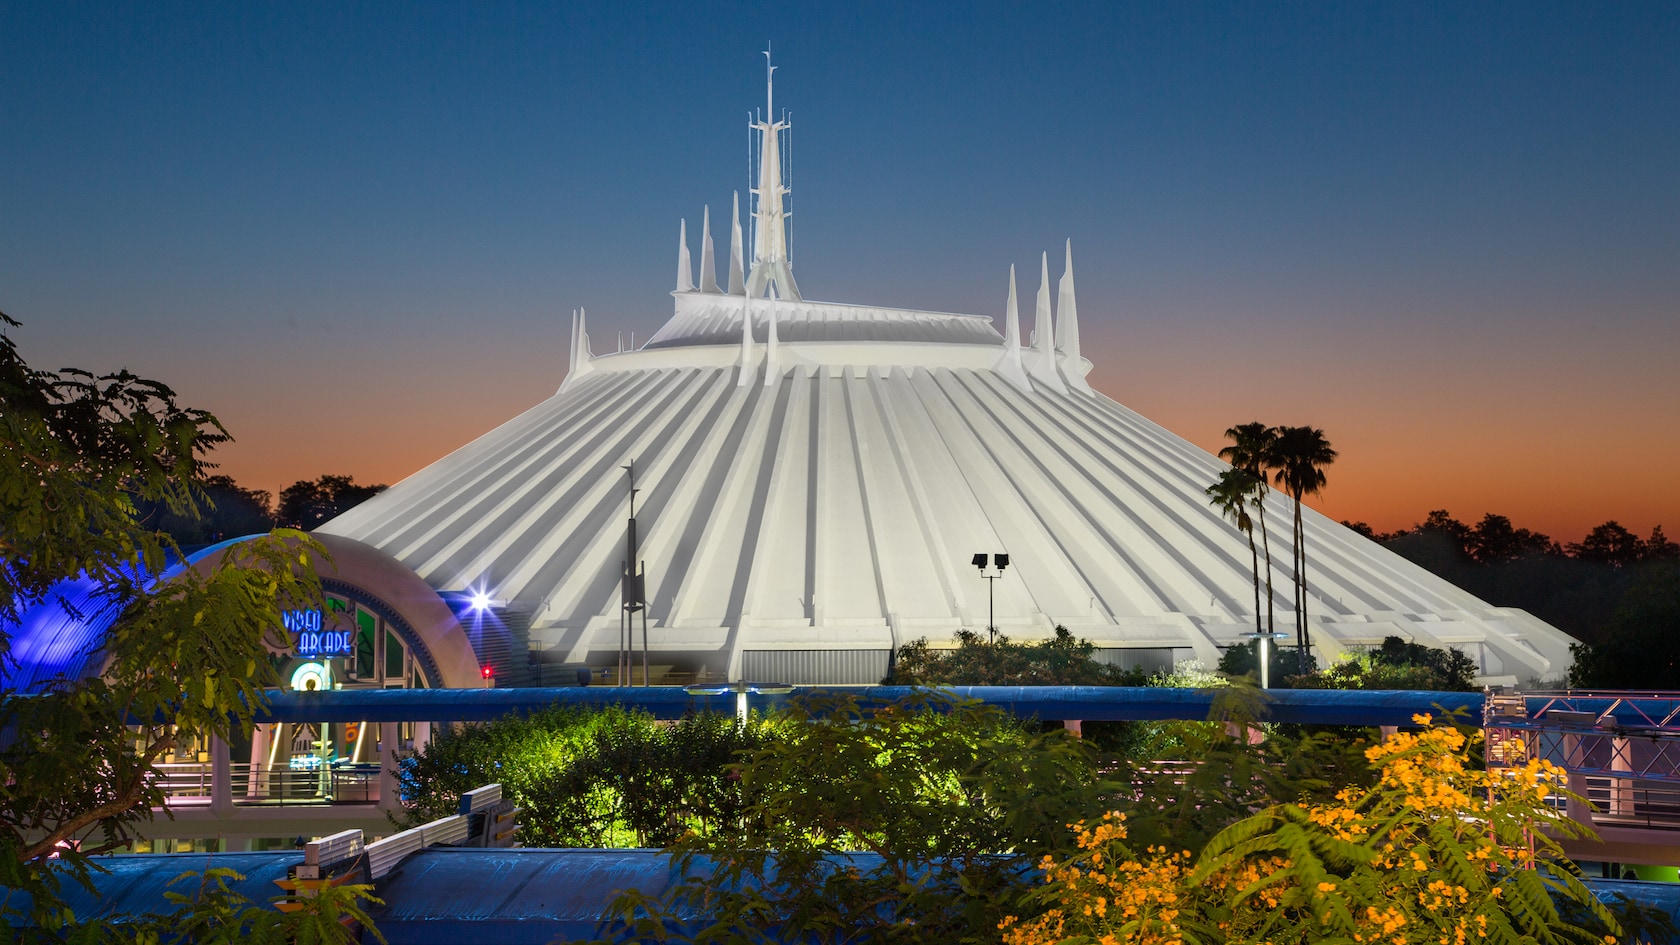 Haunted Mansion vs Space Mountain | WDWMAGIC - Unofficial Walt Disney World  discussion forums